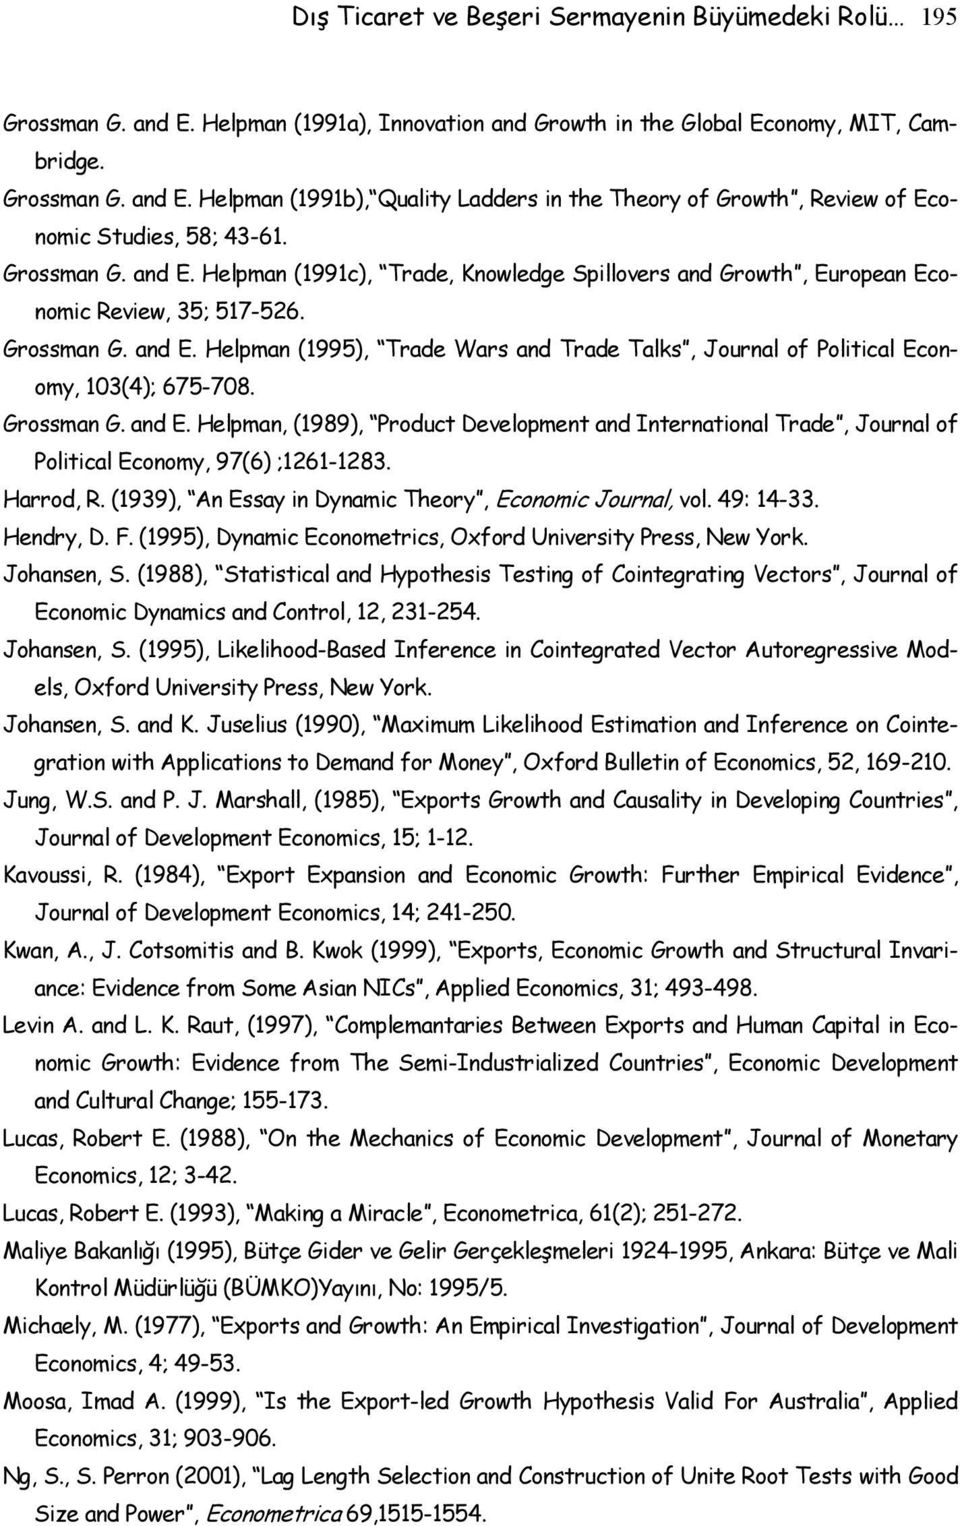 Grossman G. and E. Helpman, (1989), Product Development and International Trade, Journal of Political Economy, 97(6) ;1261-1283. Harrod, R. (1939), An Essay in Dynamic Theory, Economic Journal, vol.